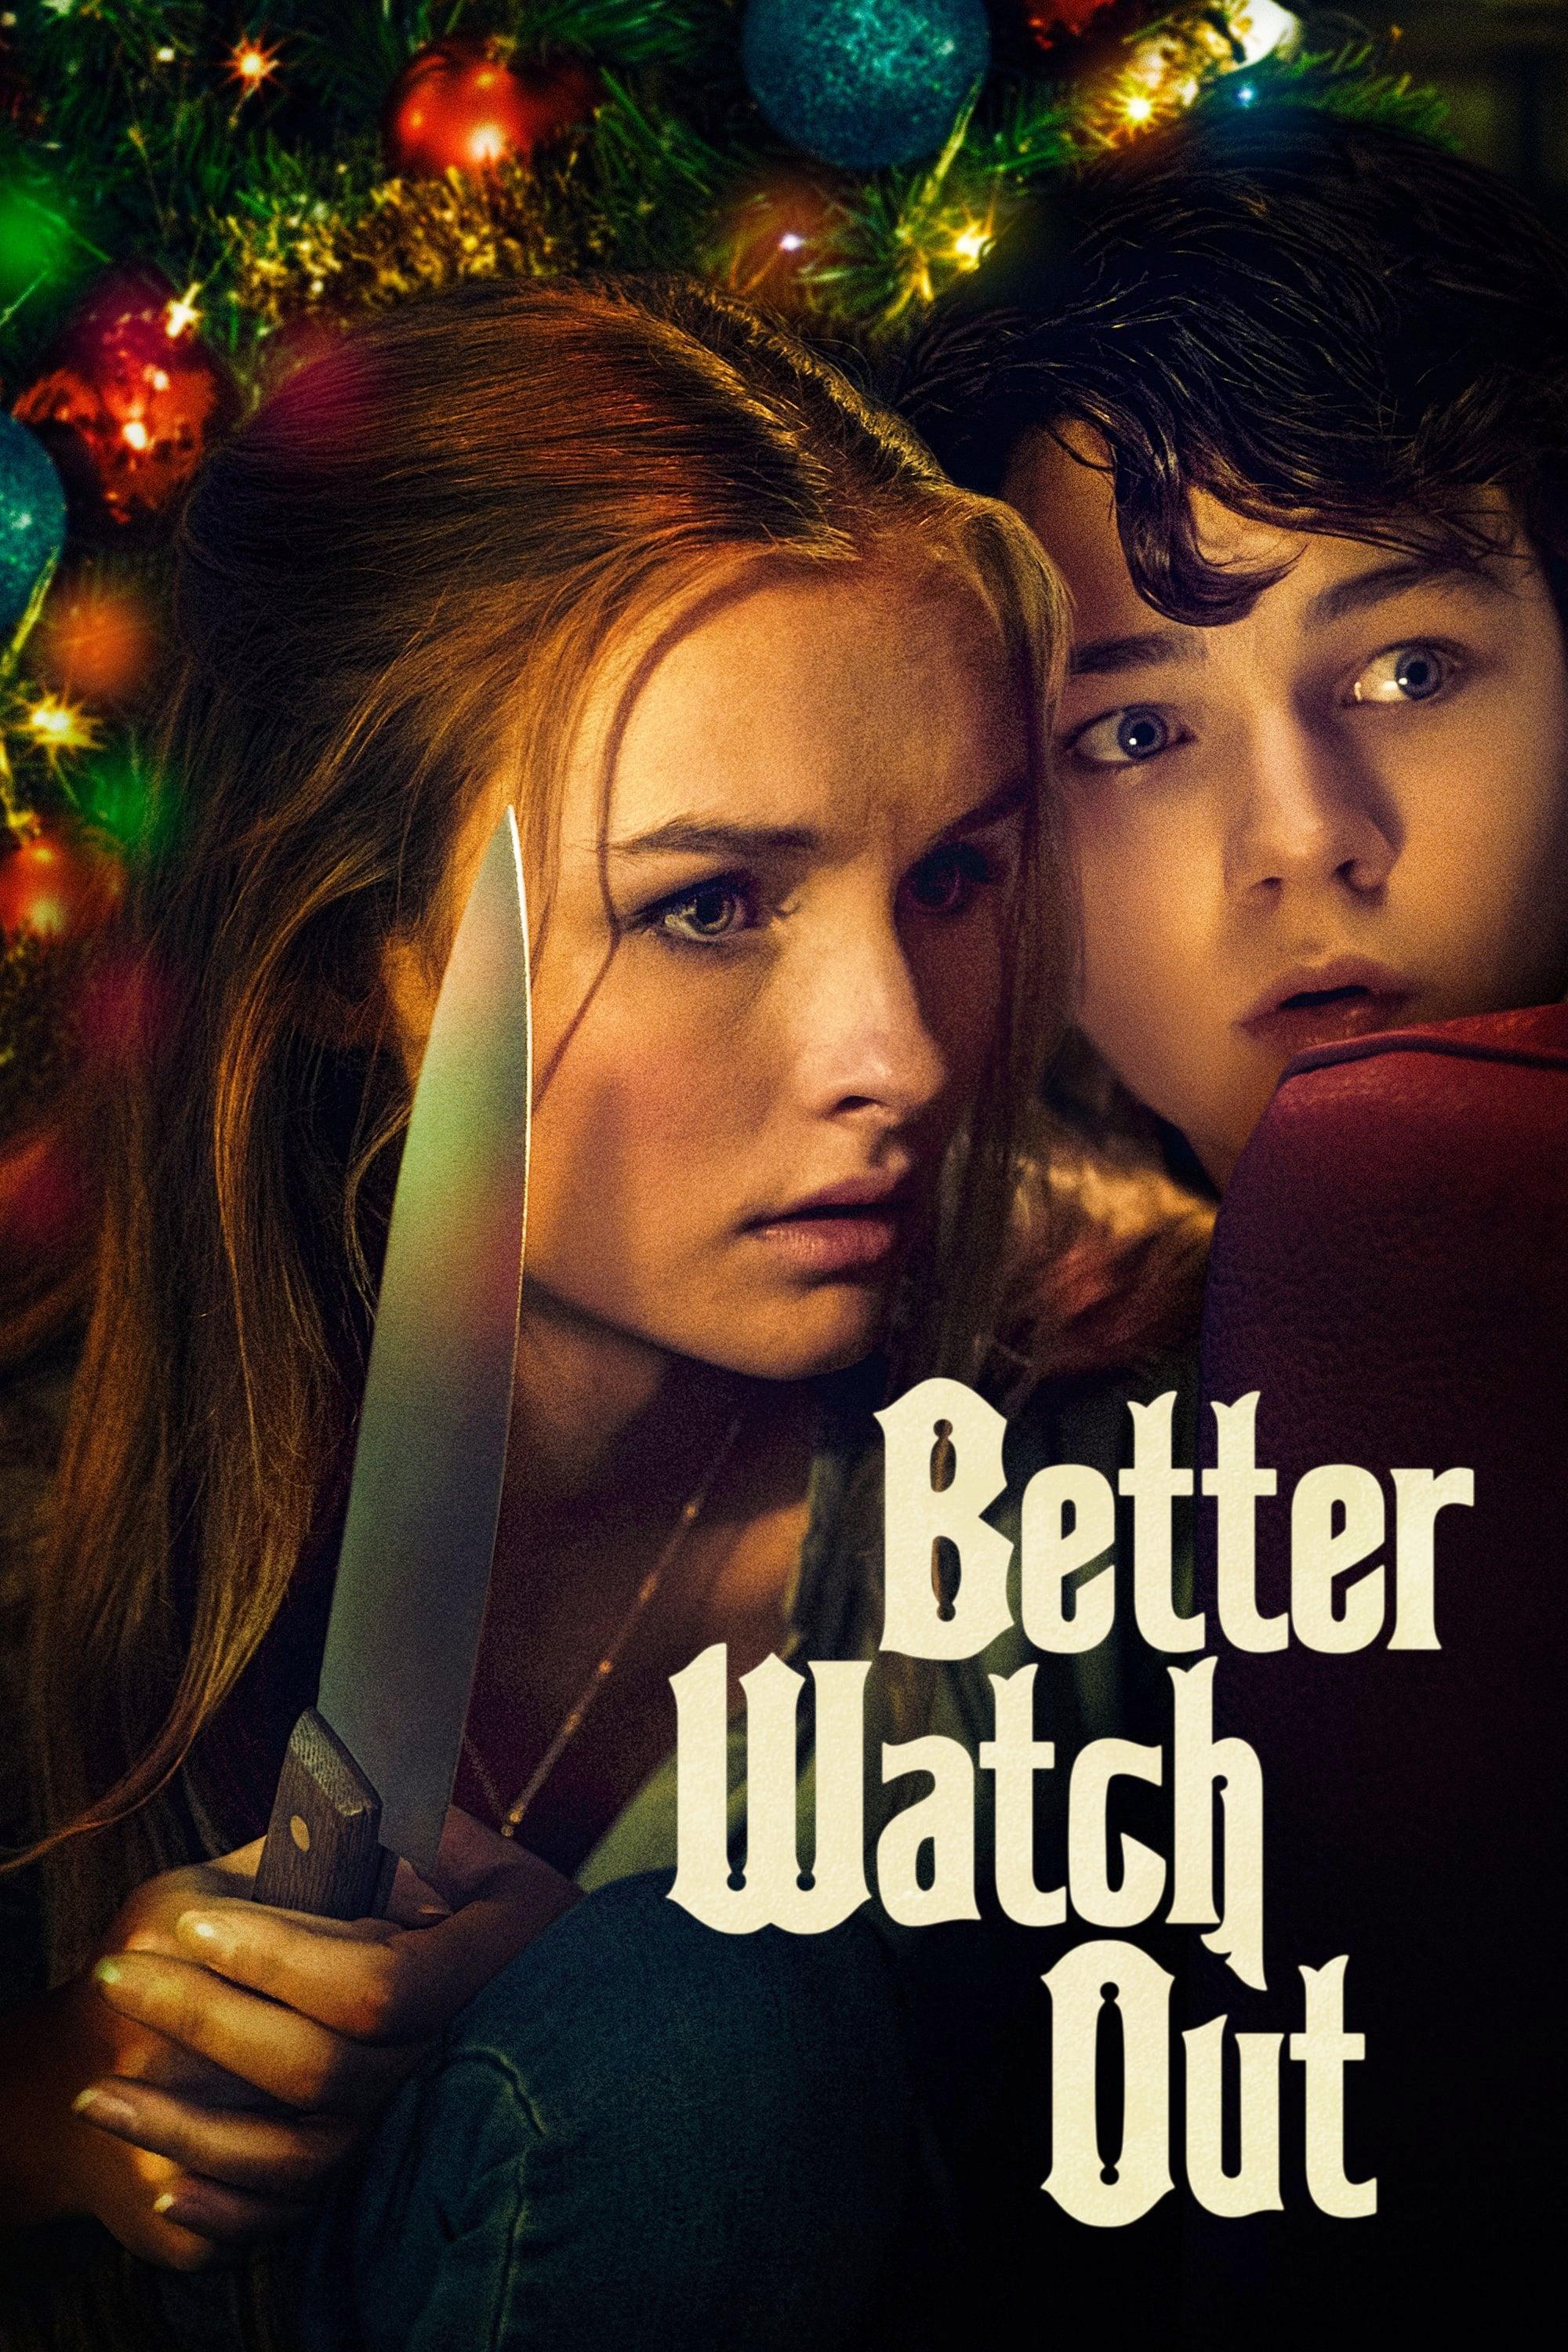 Better Watch Out poster